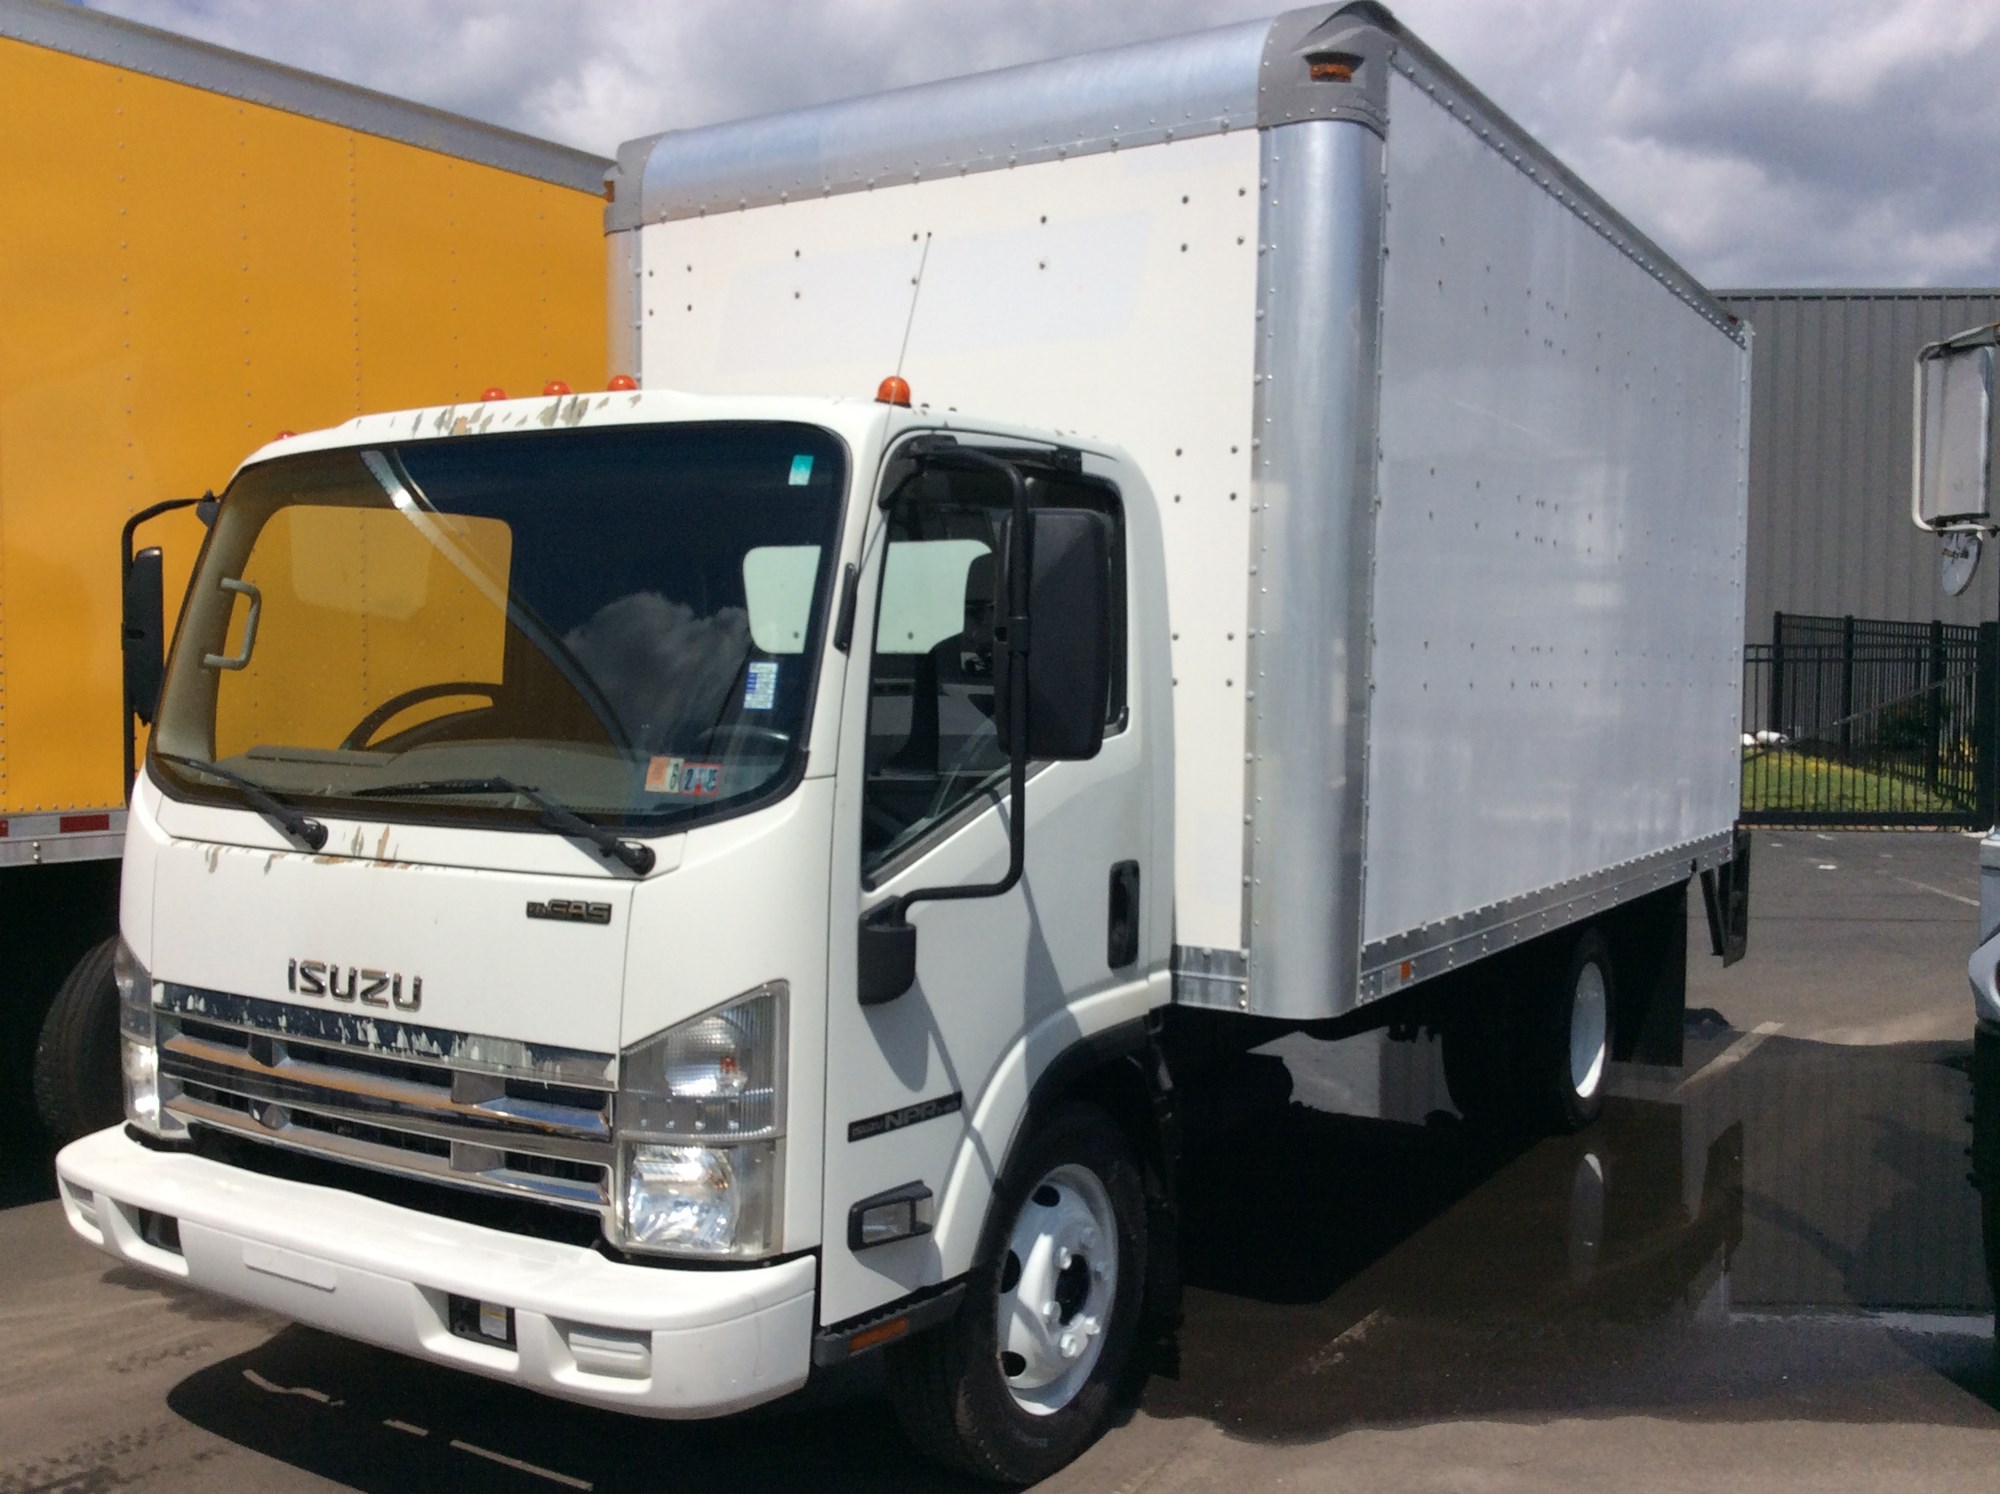 Used Truck Inventory - 1022580 01 - 28